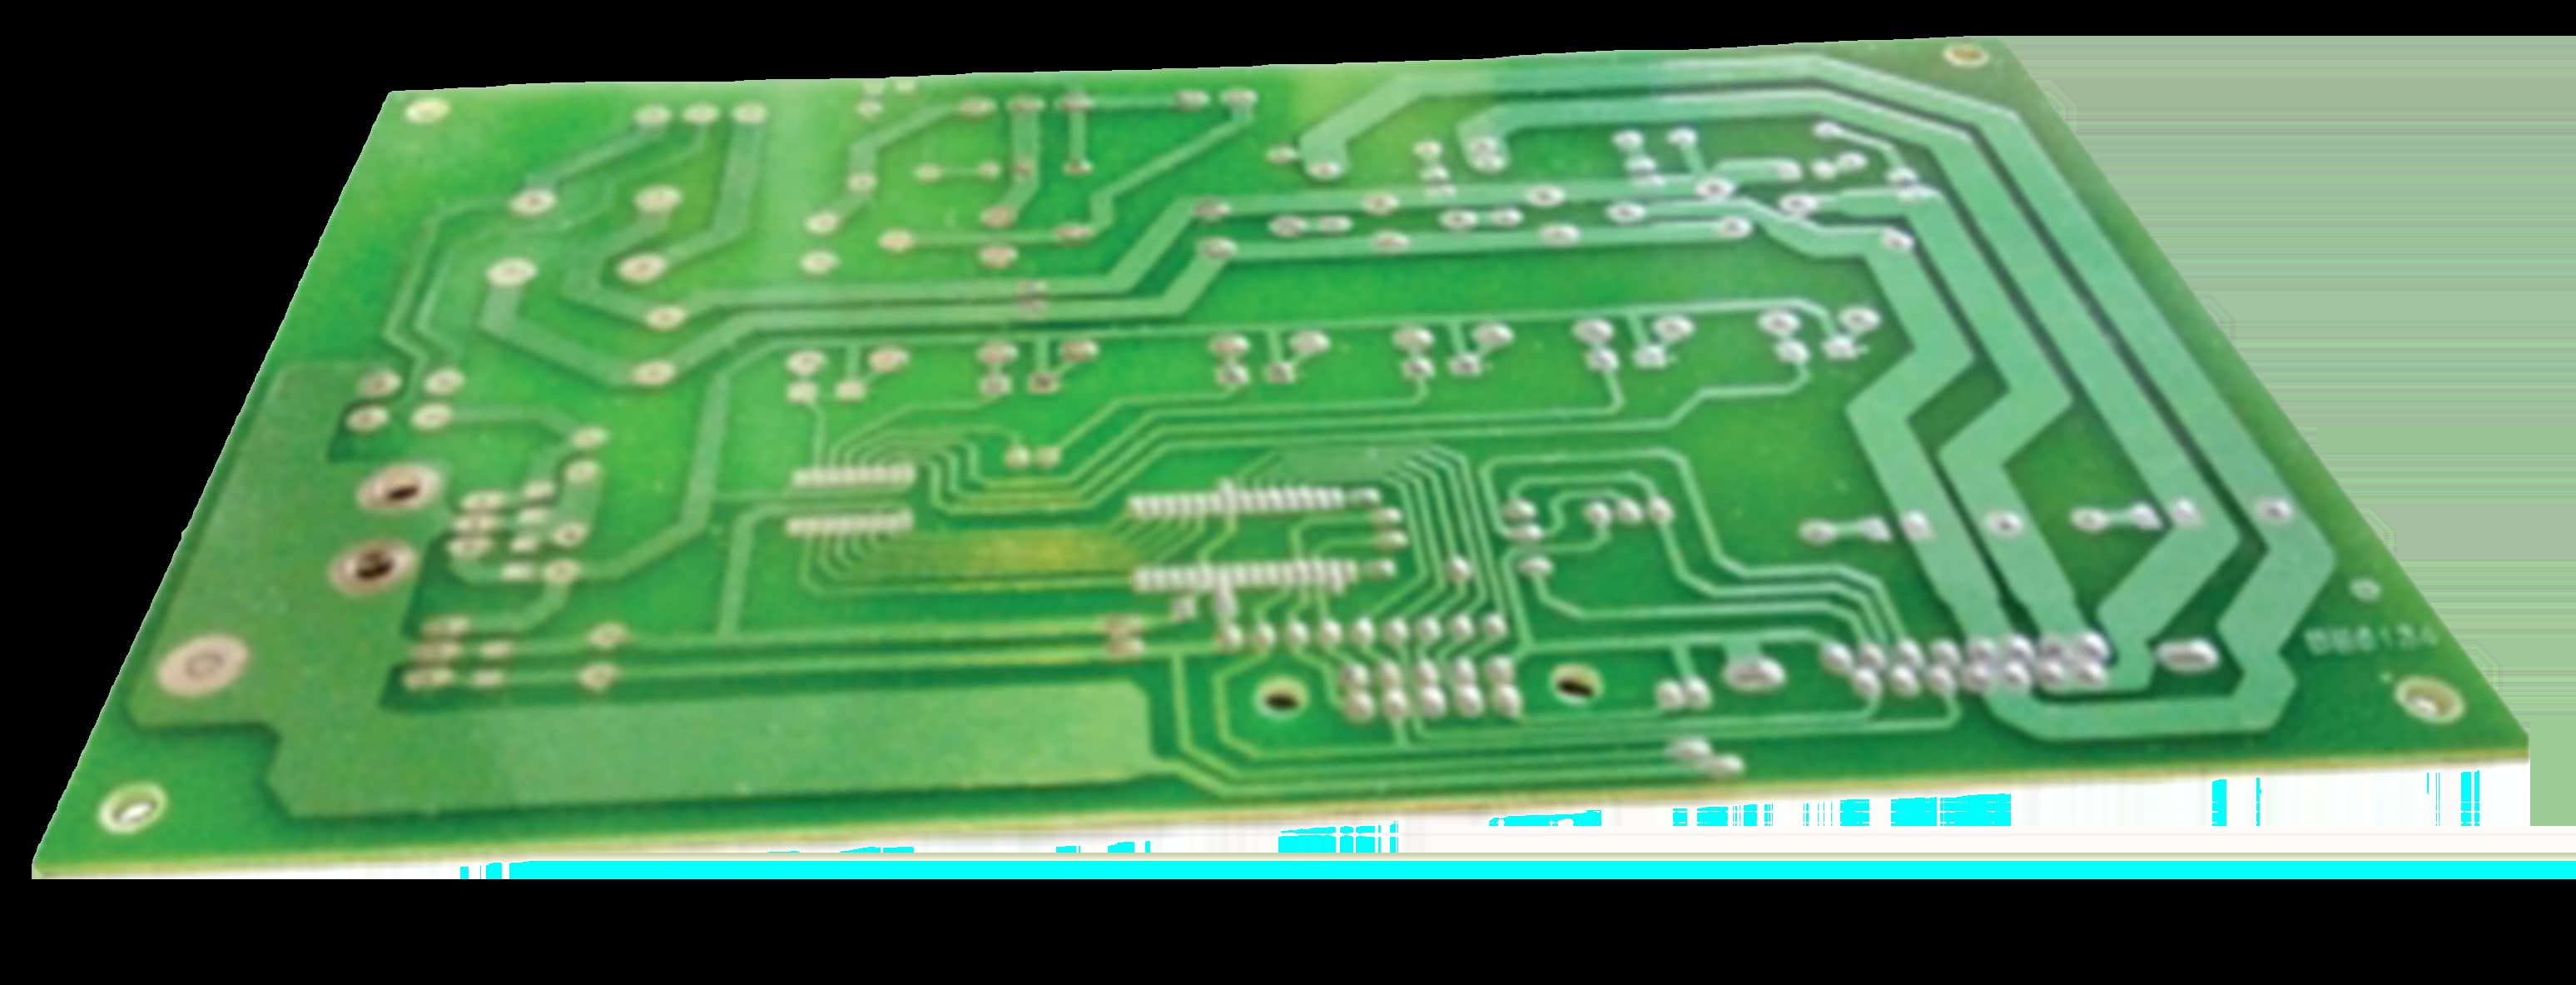 PCB (printed circuit boards) consultants